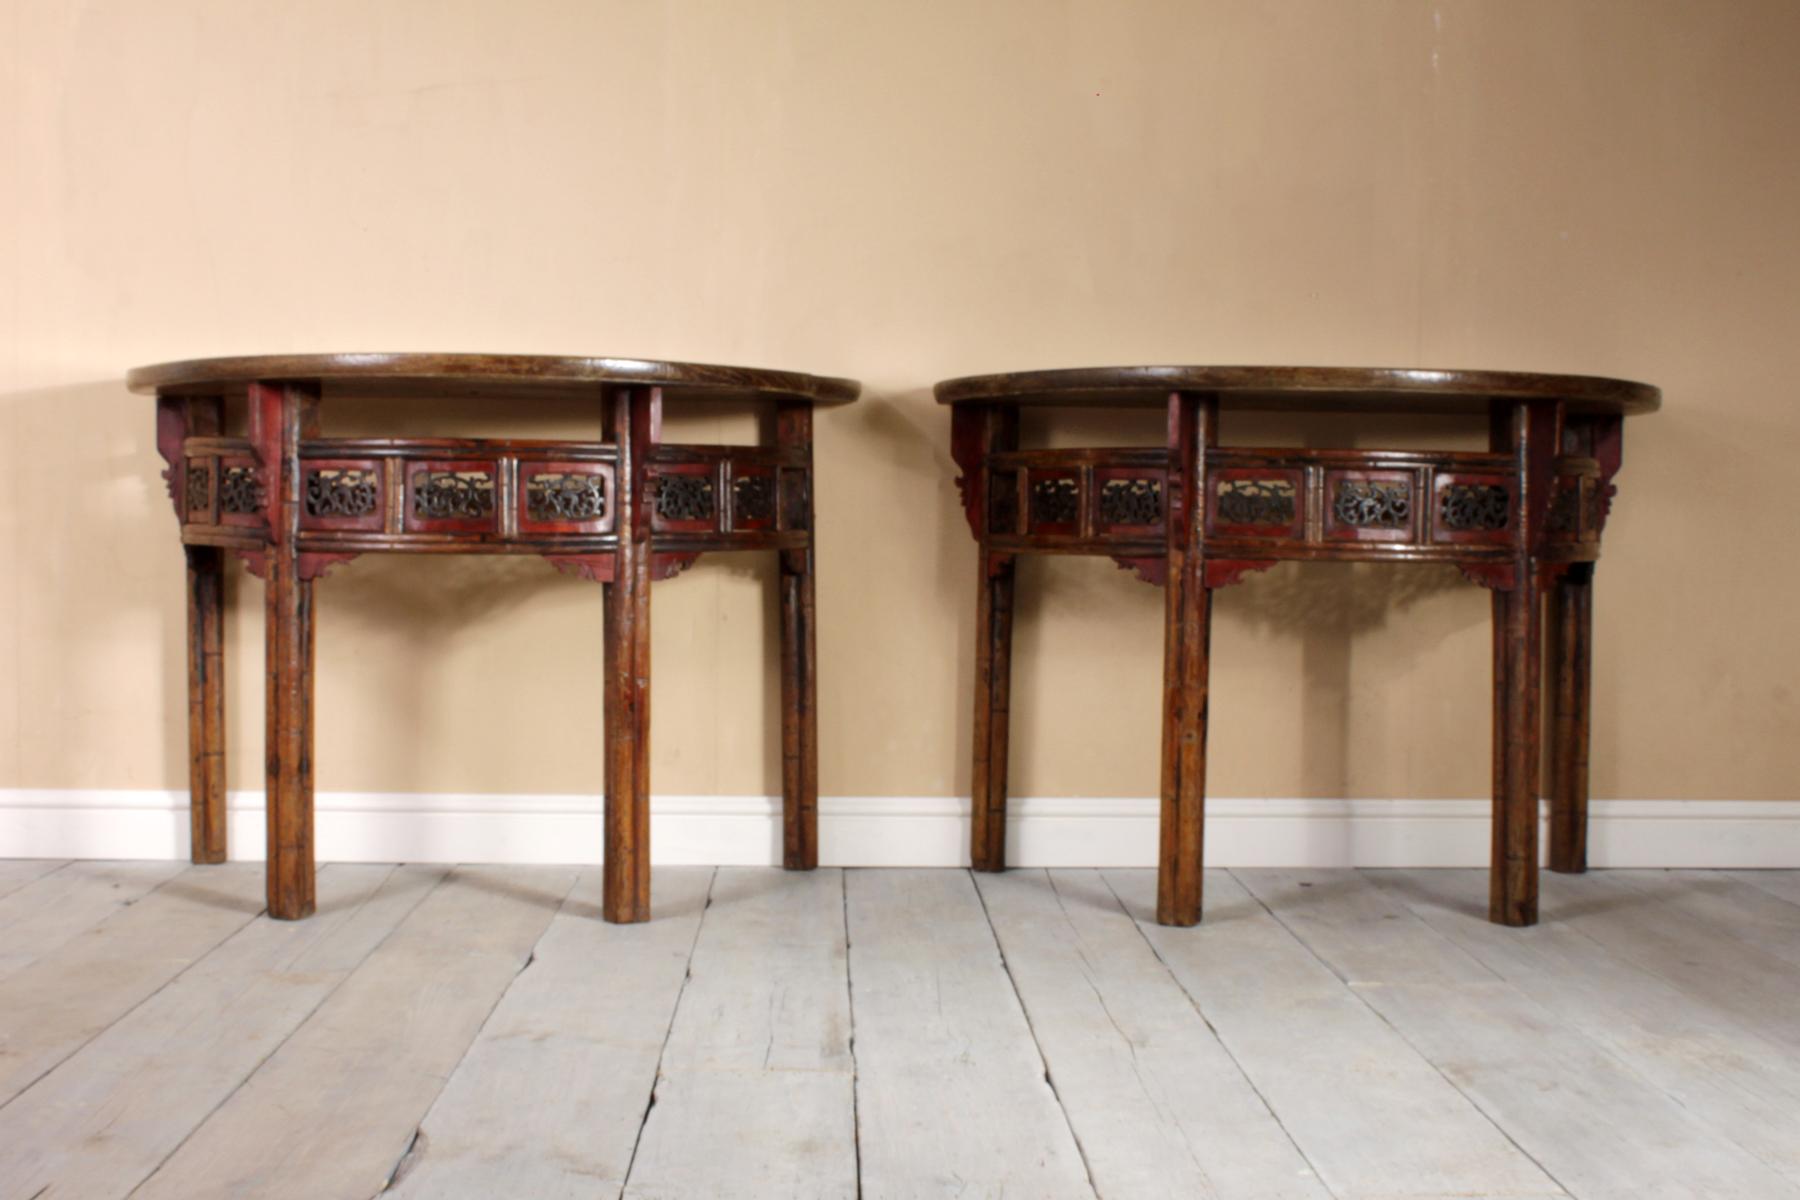 Pair of Chinese half moon console tables, circa 1860.
A pair of Chinese console tables that join to make a round table from the Shanxi Provence, produced in pine and poplar wood with faux bamboo and pierced carved detail, originally lacquered in